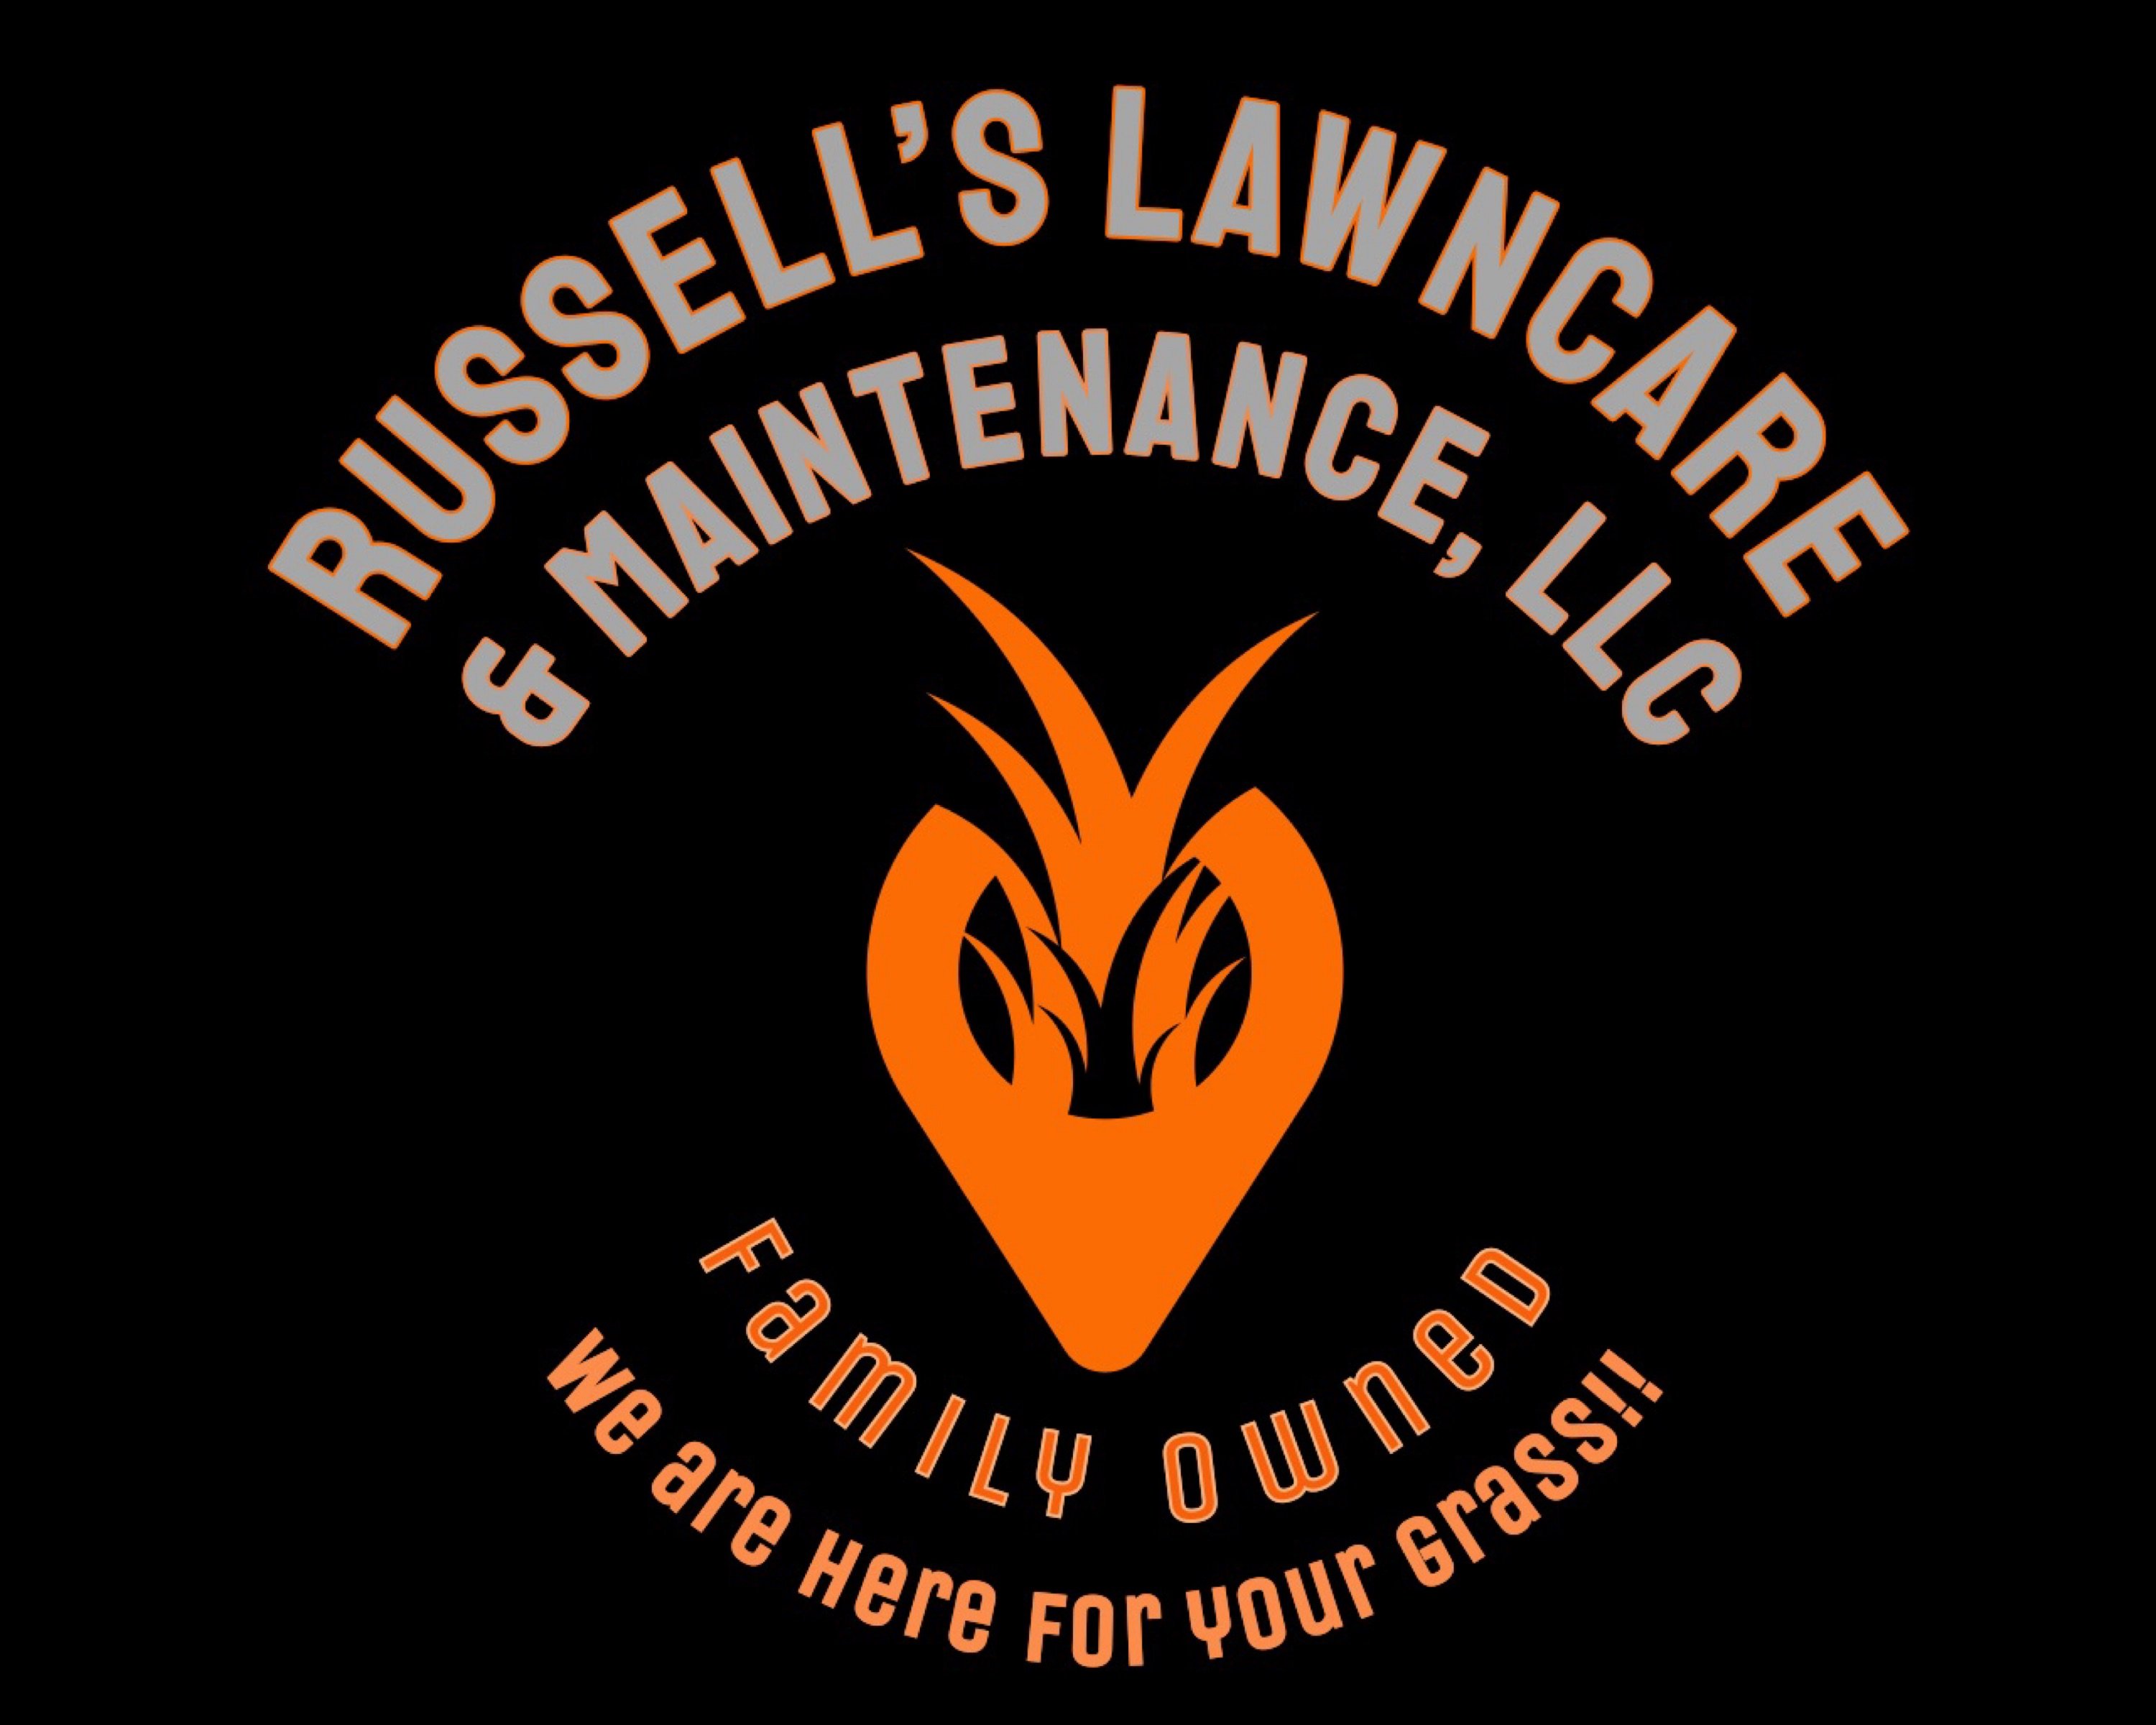 Russell's Lawn Care Logo